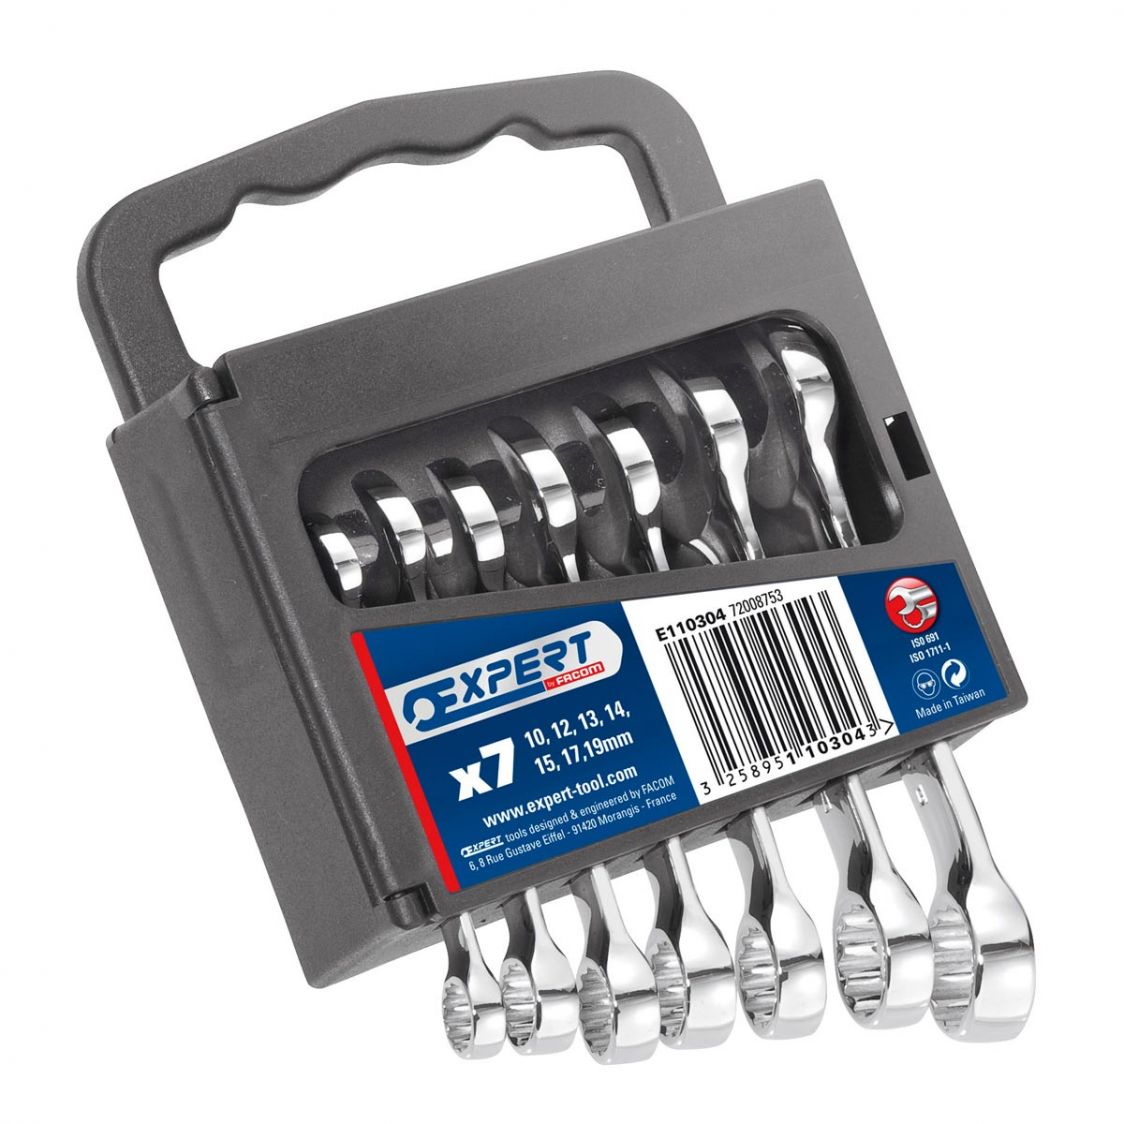 EXPERT by FACOM E110304 - 7pc Metric Stubby Combination Spanner Set + Clip